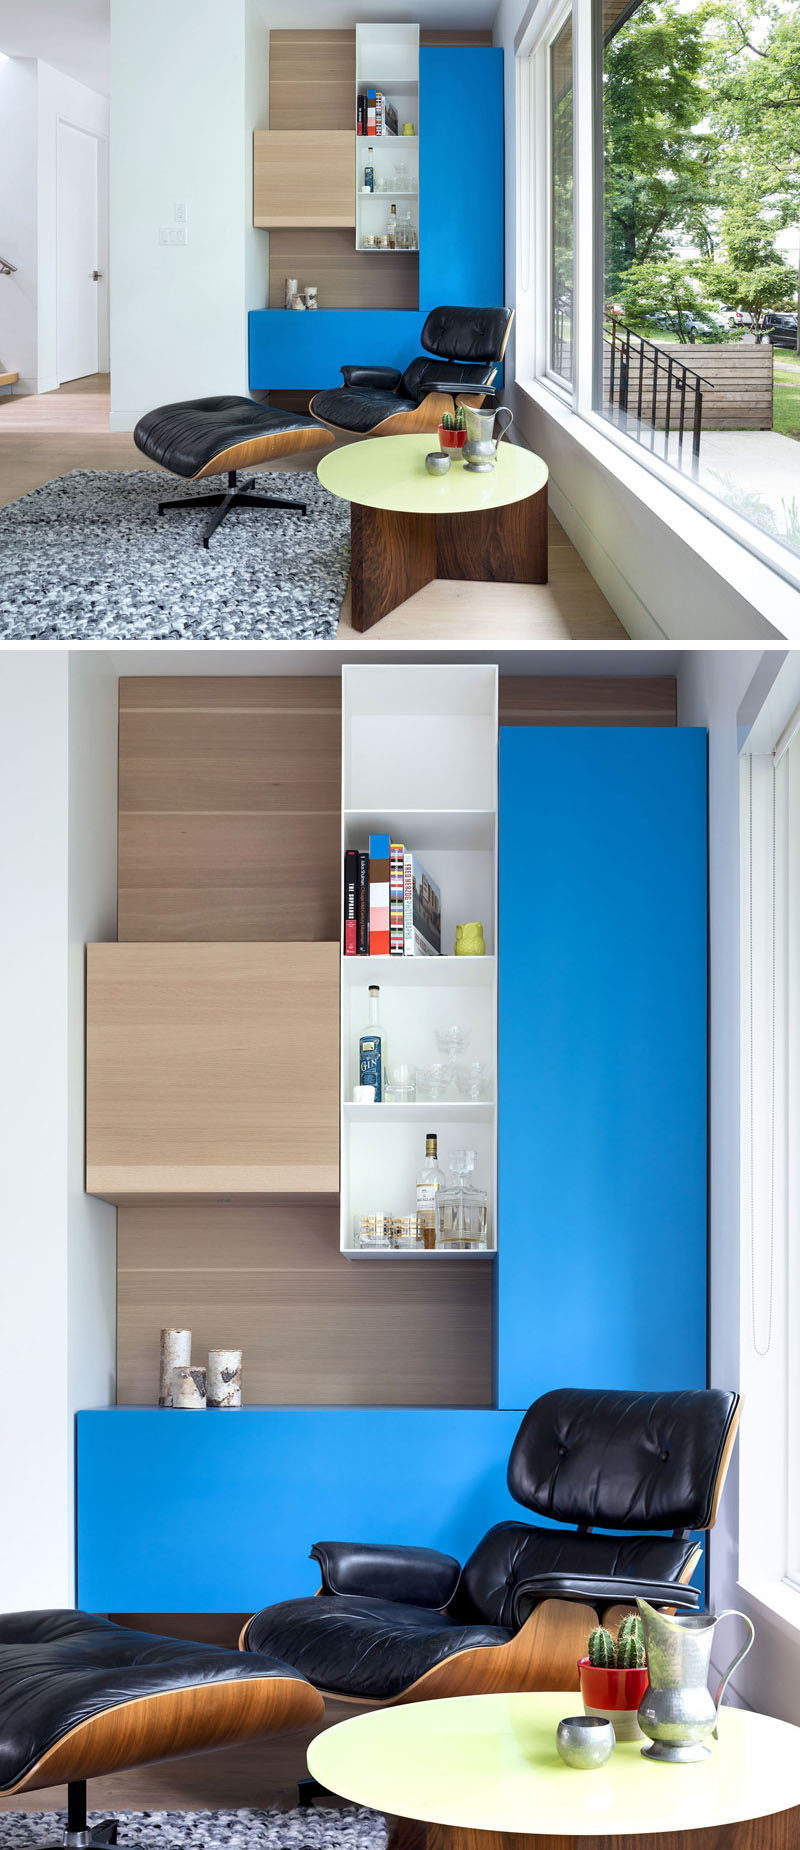 Pops of color and built-in shelving have been used in this small sitting area.